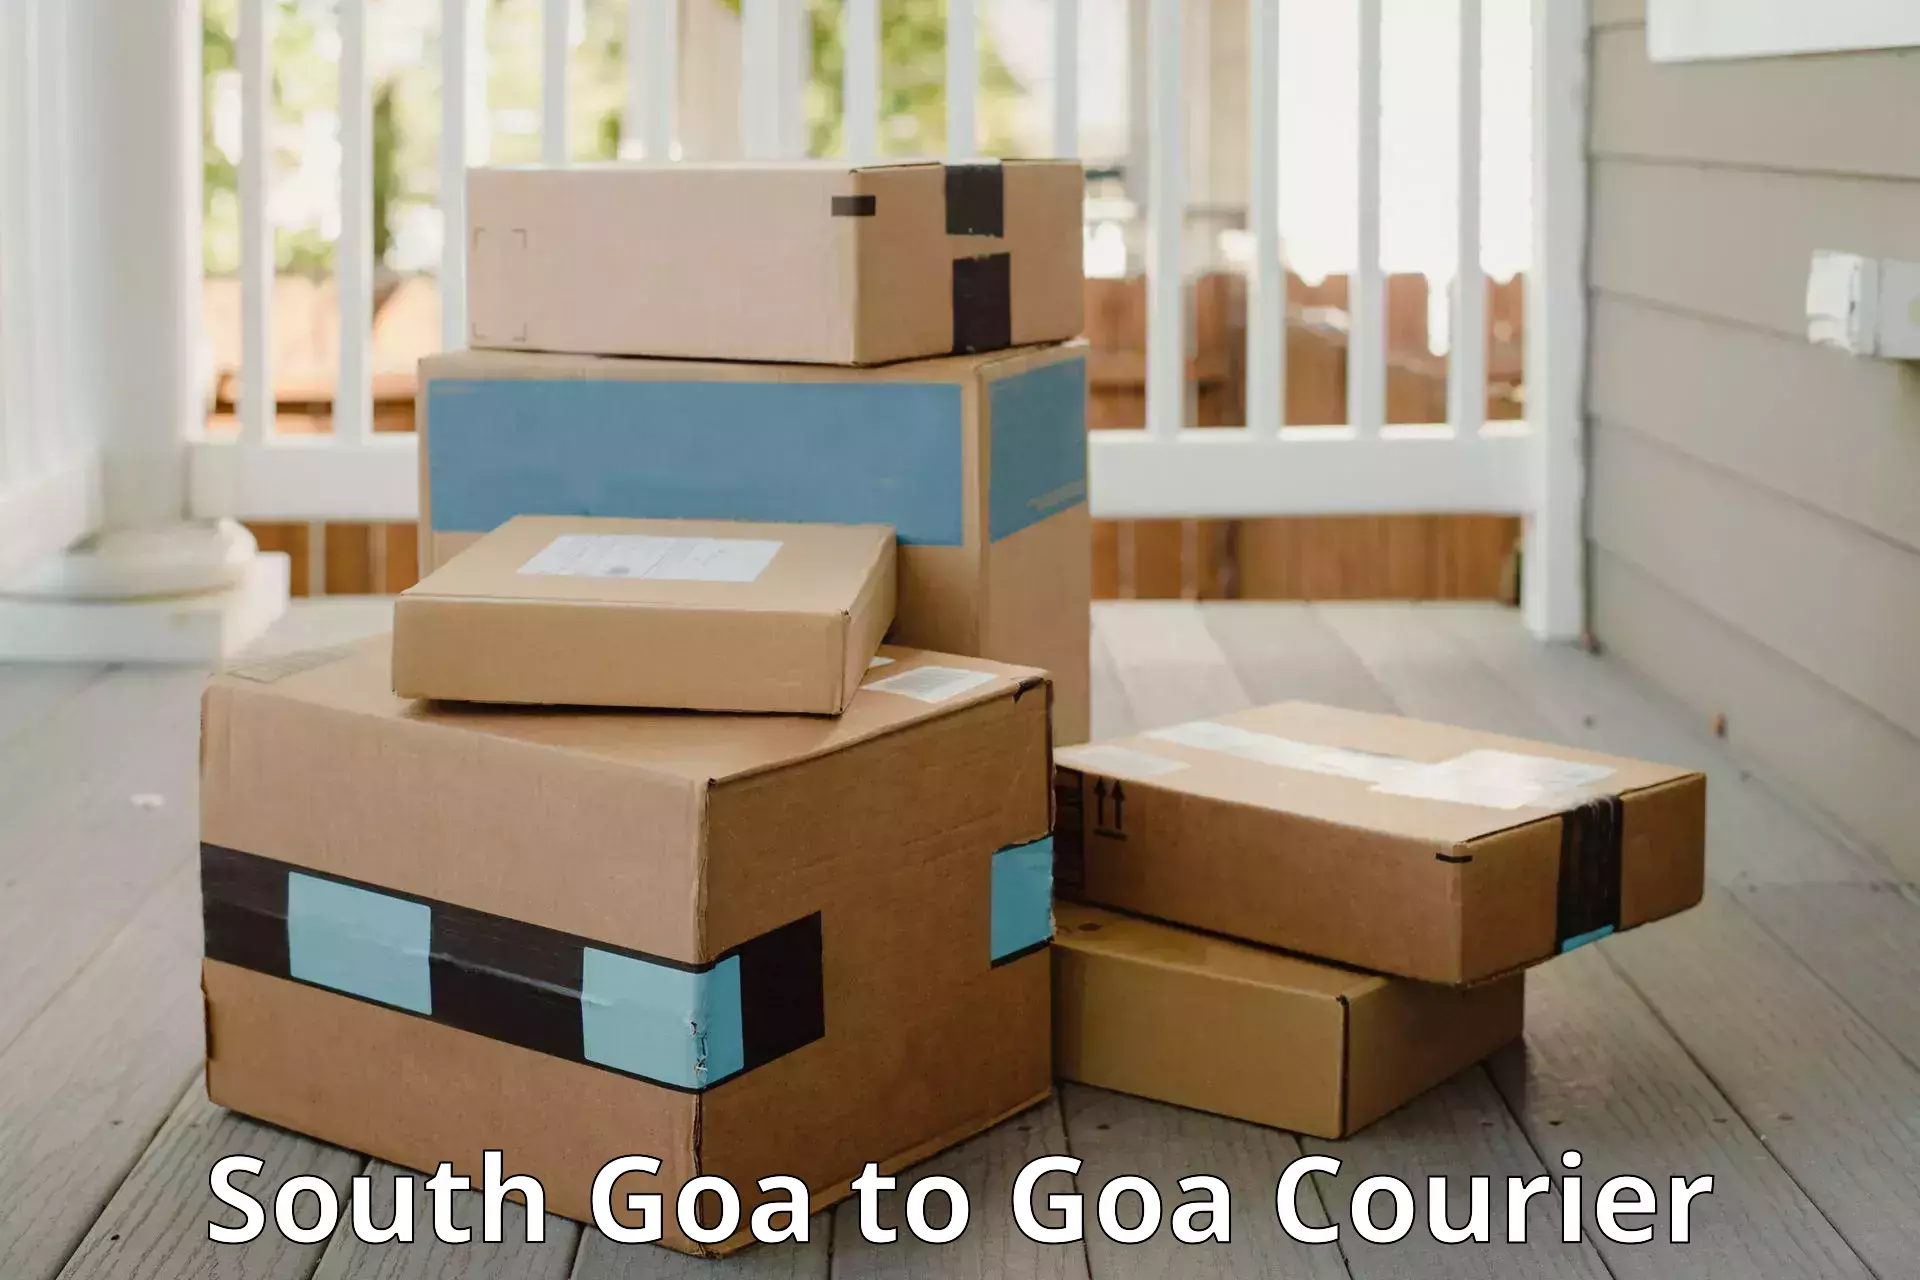 Door to door luggage delivery South Goa to South Goa